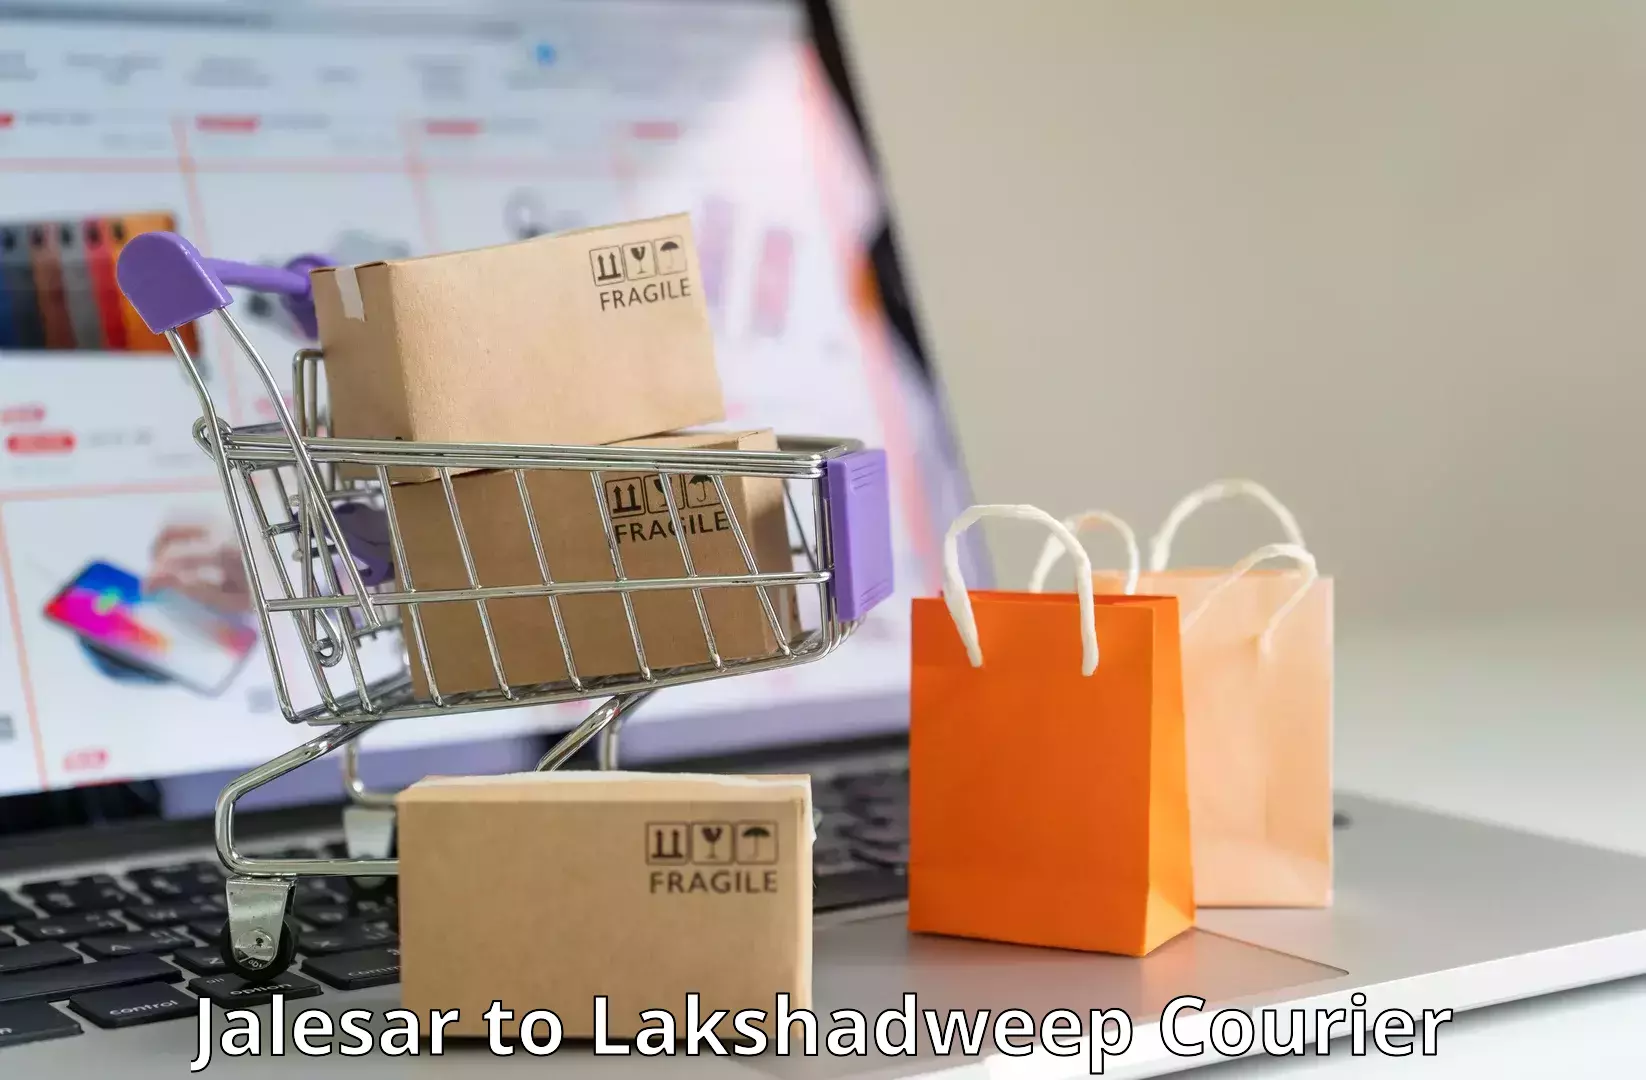 Domestic courier Jalesar to Lakshadweep